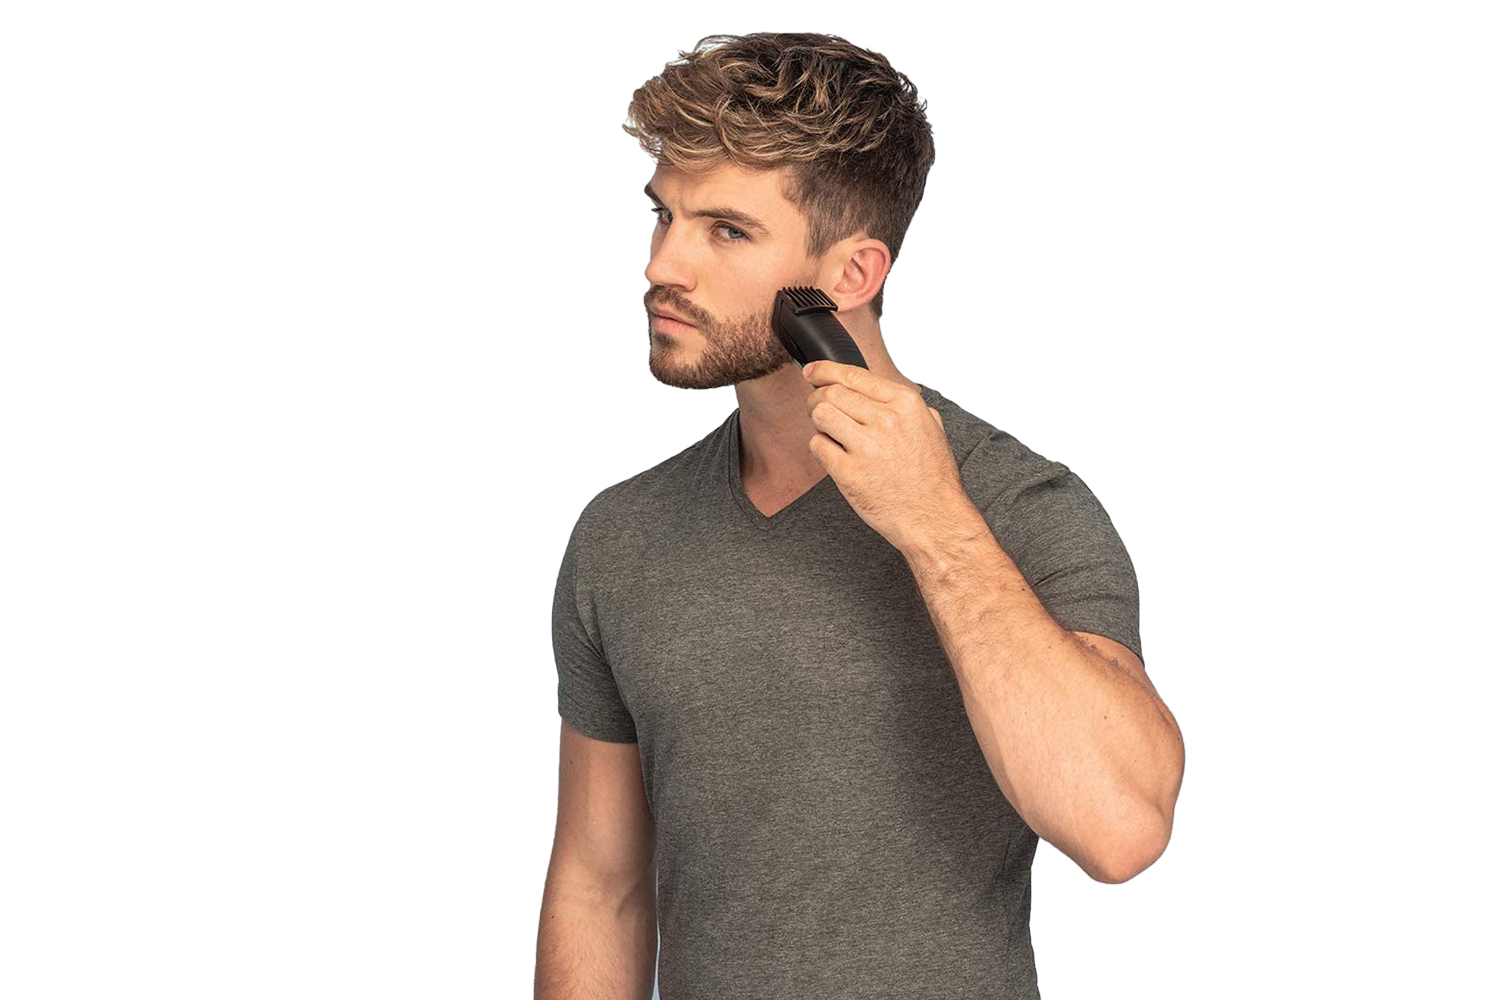 hair and beard trimmers ireland